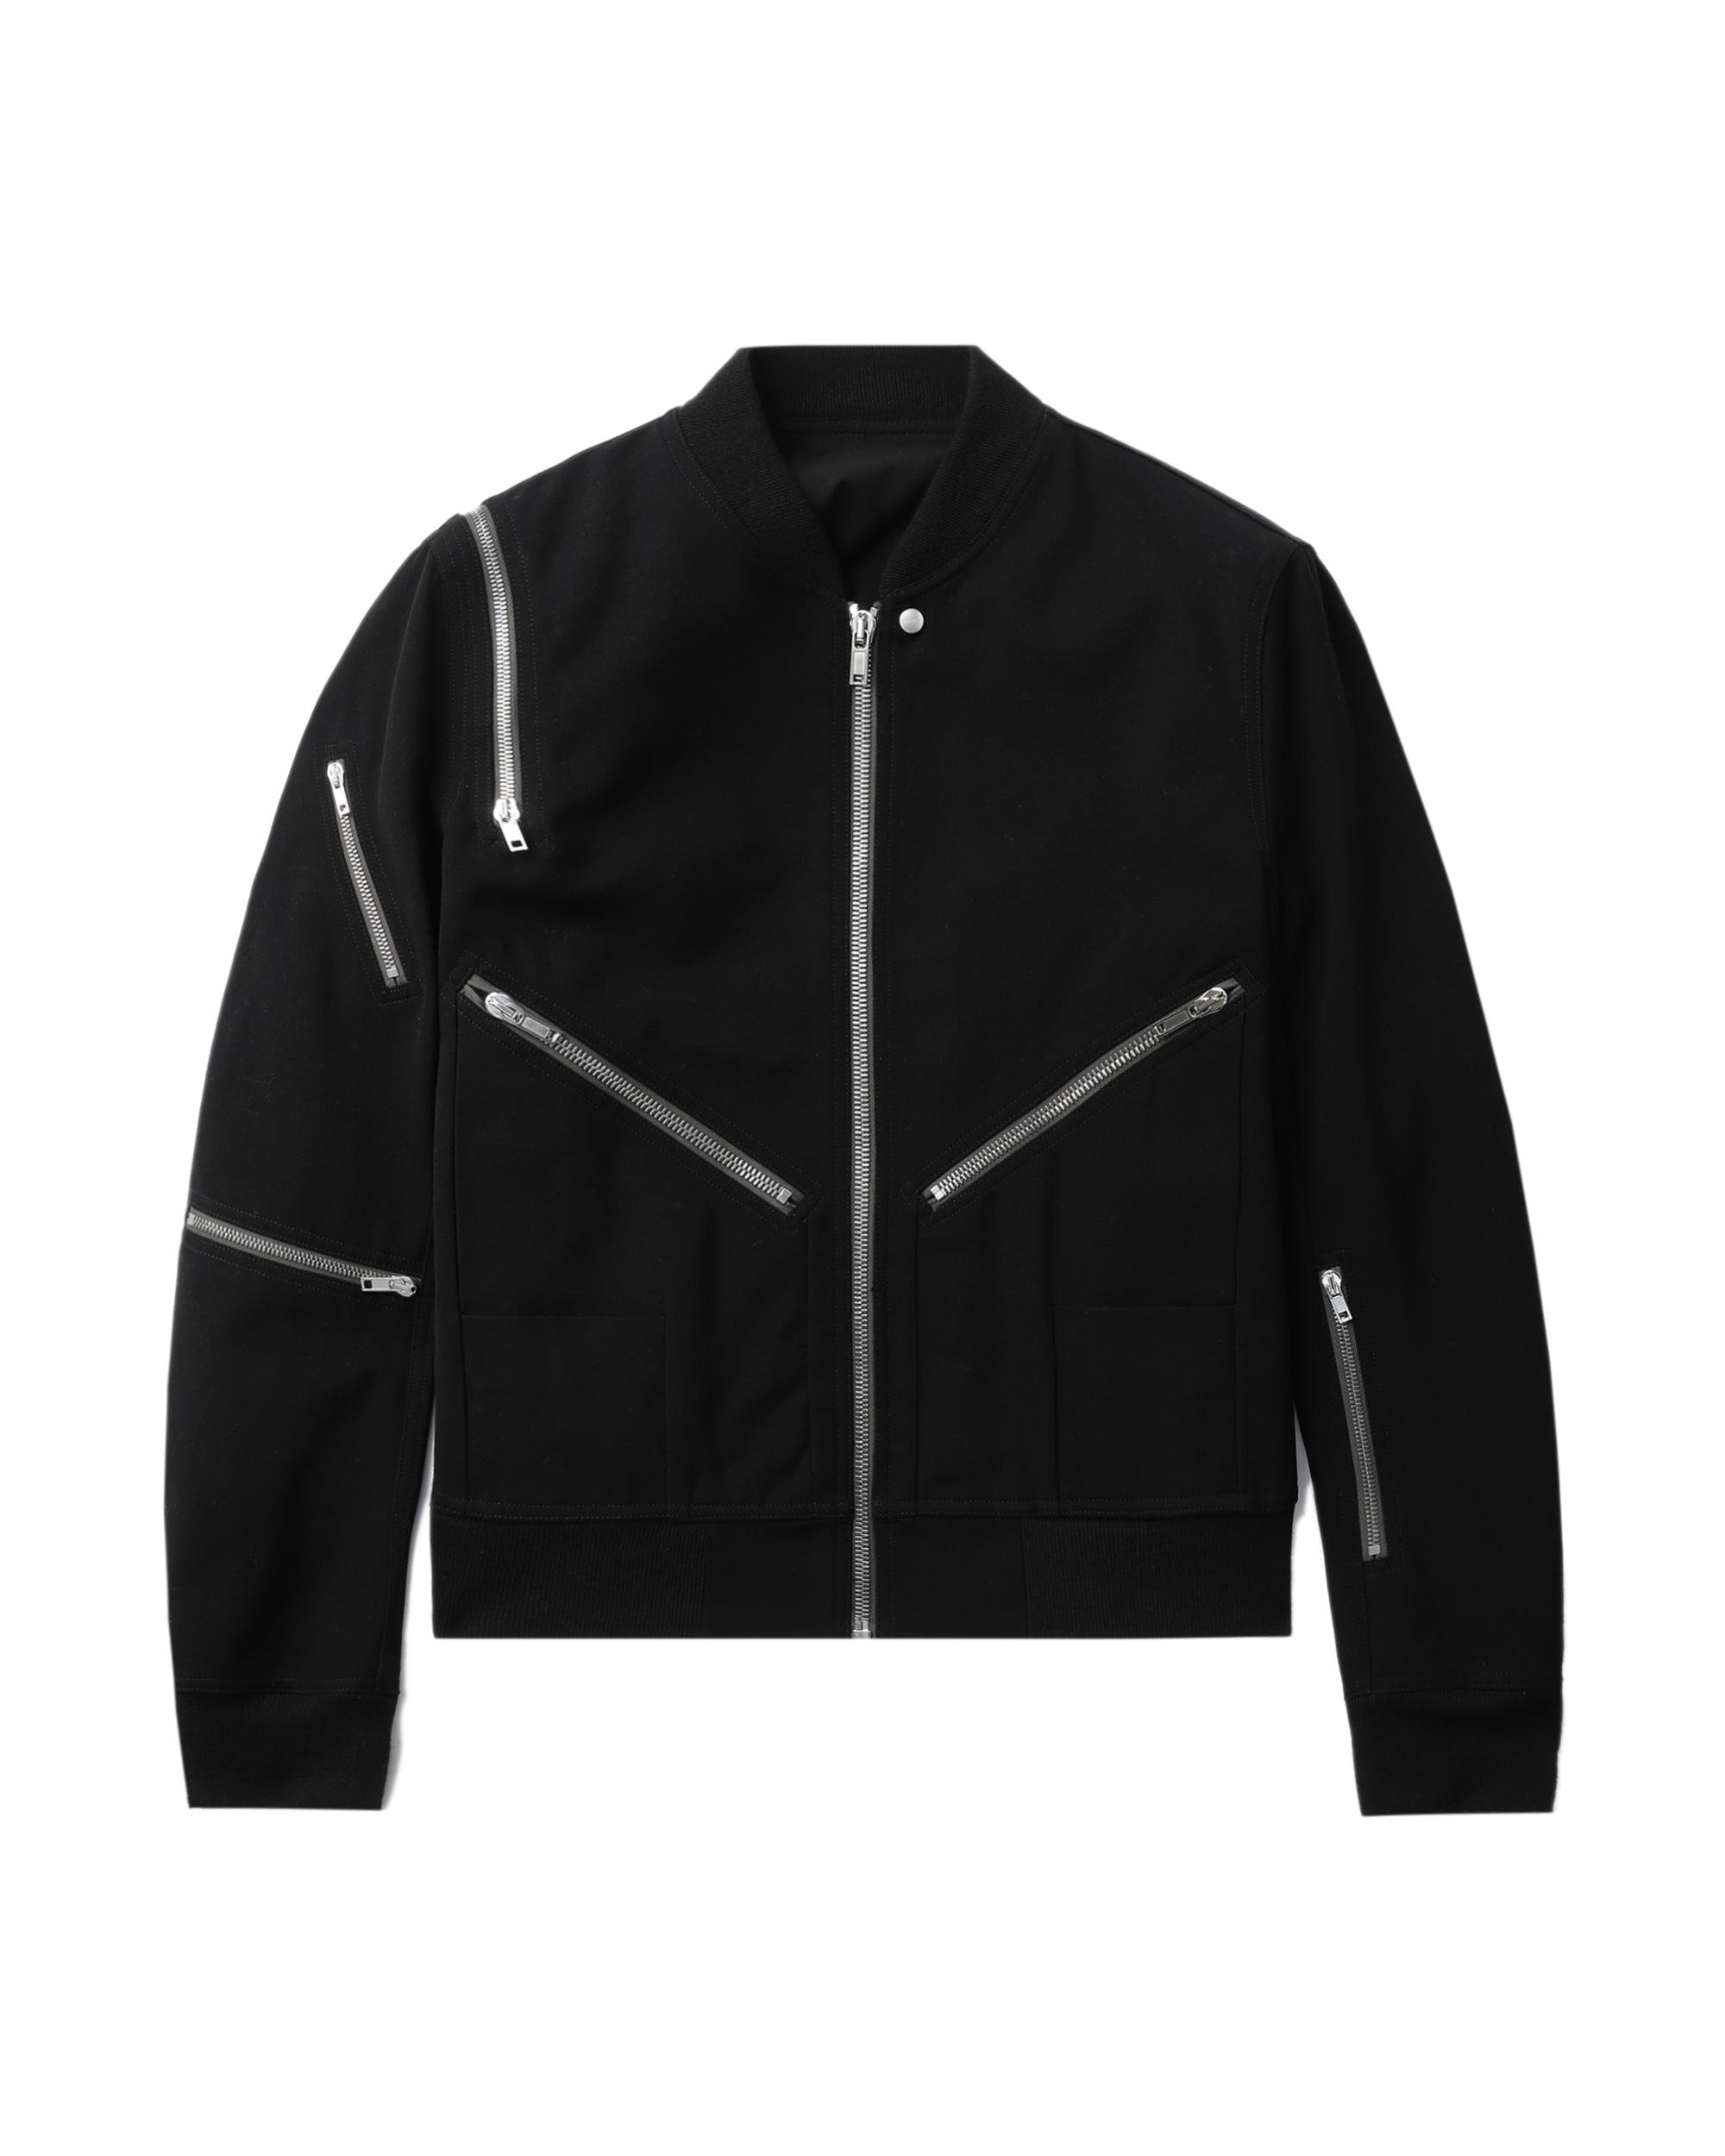 Zippers overcoat by RICK OWENS